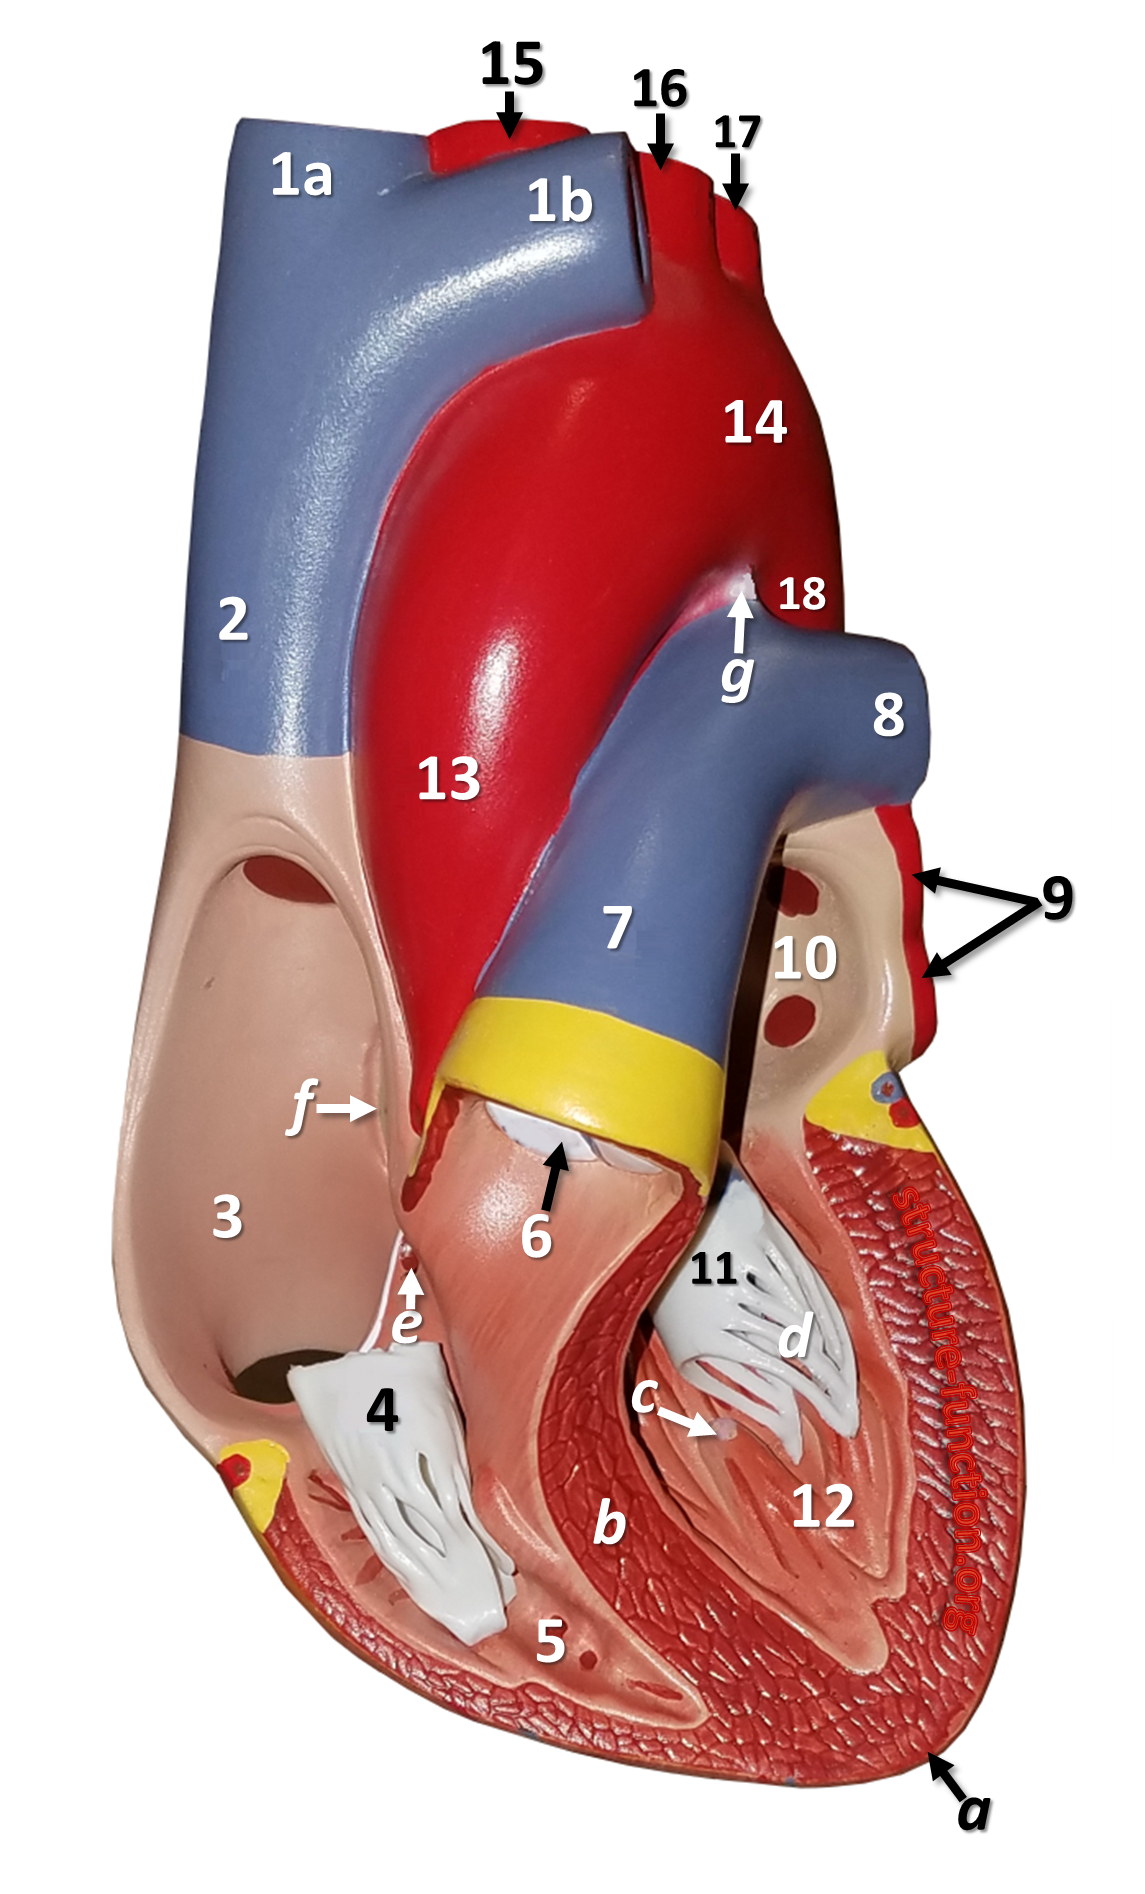 Frontal section of an anatomy heart model with structures labeled by letters and numbers